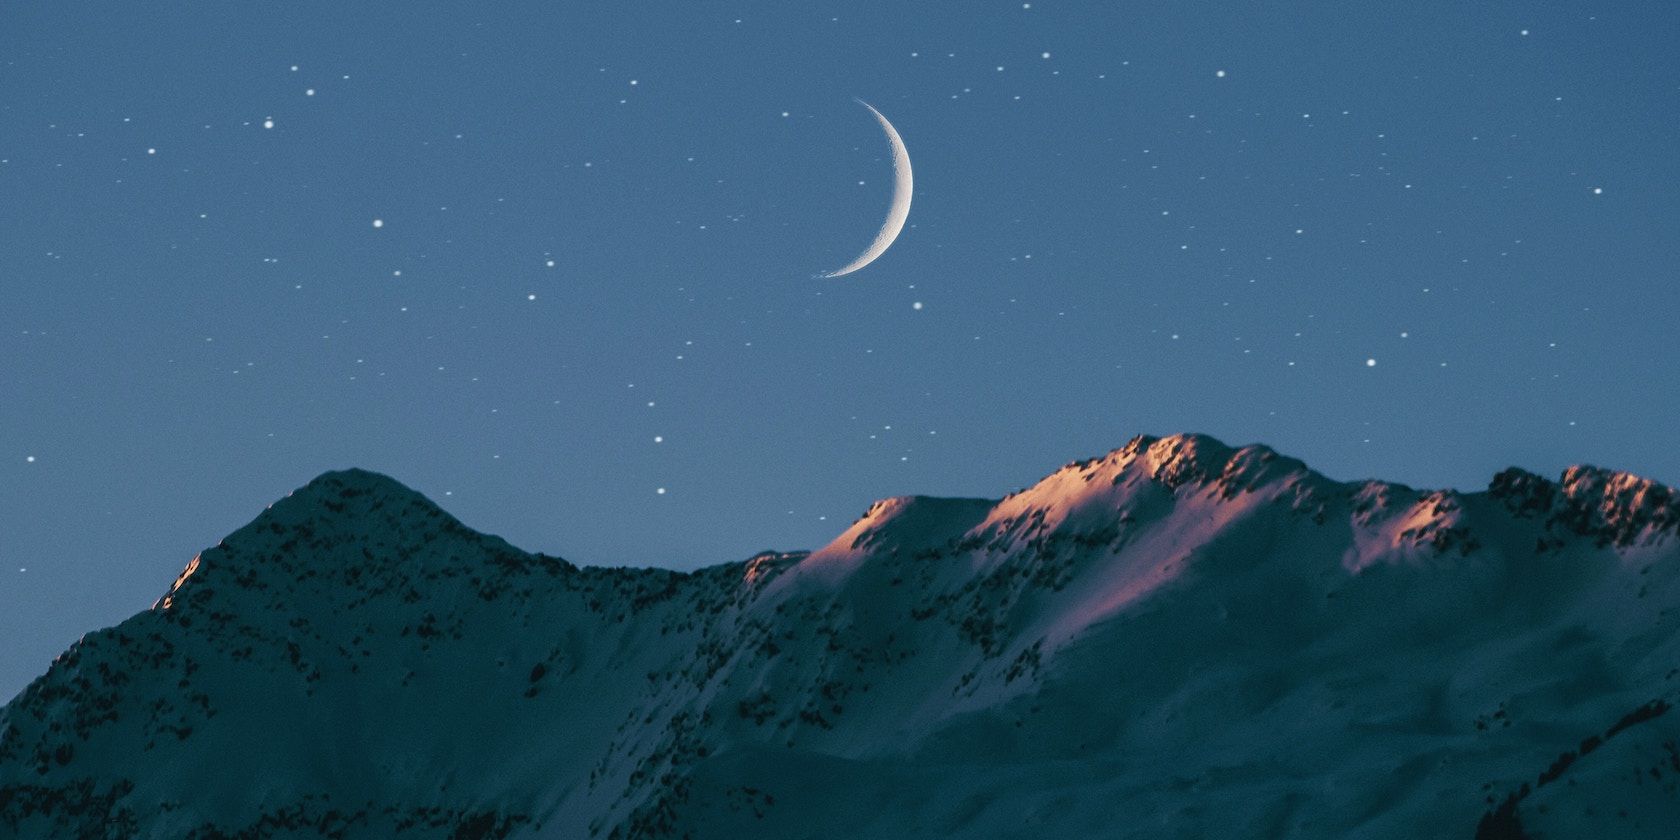 A crescent moon over a mountain at nighttime